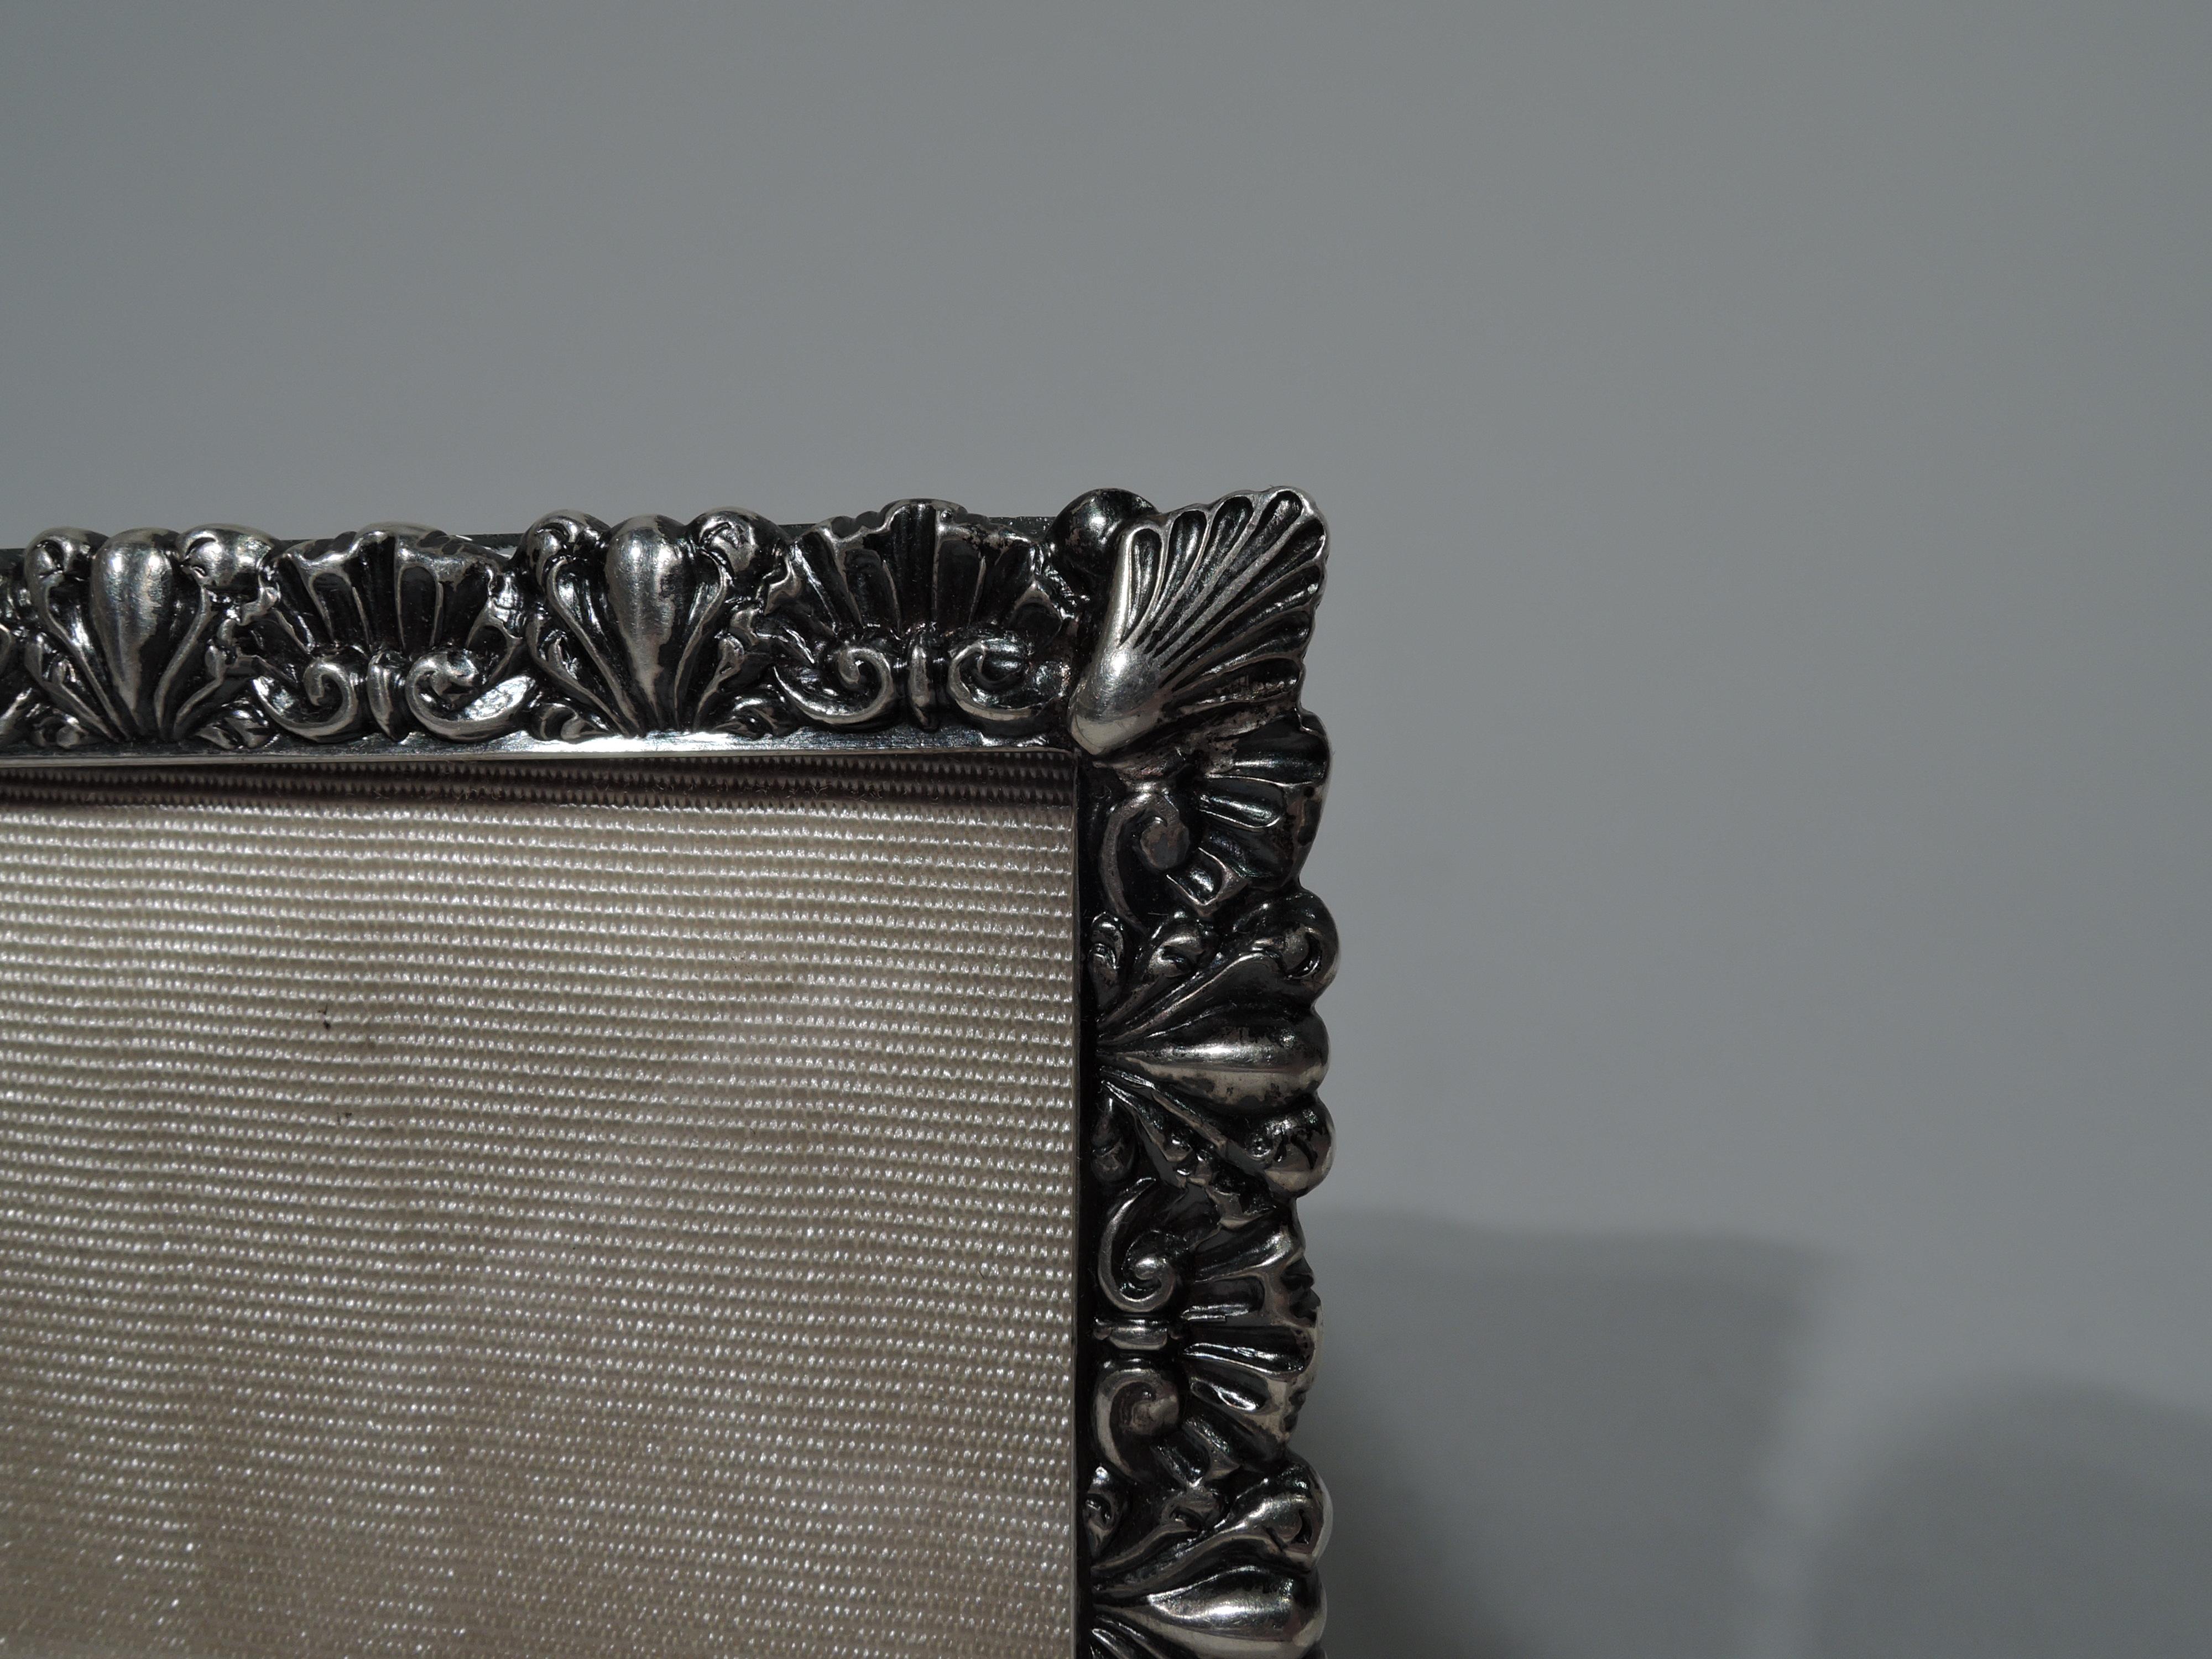 Pretty sterling silver picture frame. Made by Bigelow, Kennard & Co. in Boston, ca 1900. Rectangular window surrounded by alternating tooled shells and leaves. With glass, silk lining, and hinged silver wire support. Fully marked. 

Dimensions: